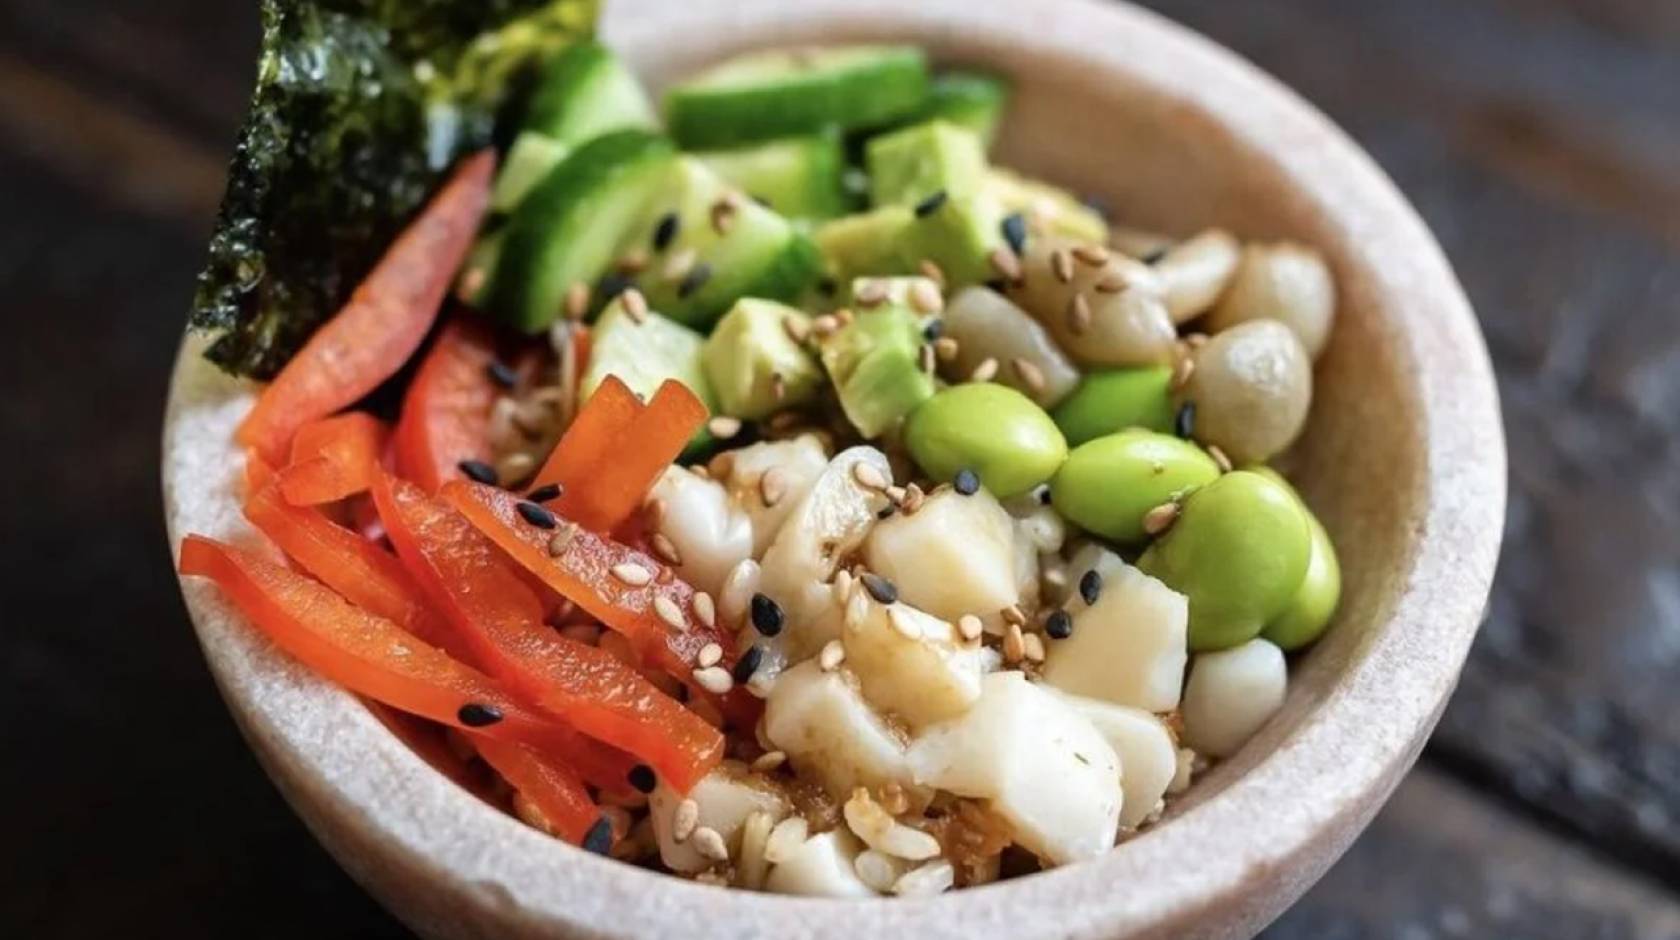 A poke bowl with vegetables, edamame, fish, sesame seeds and seaweed